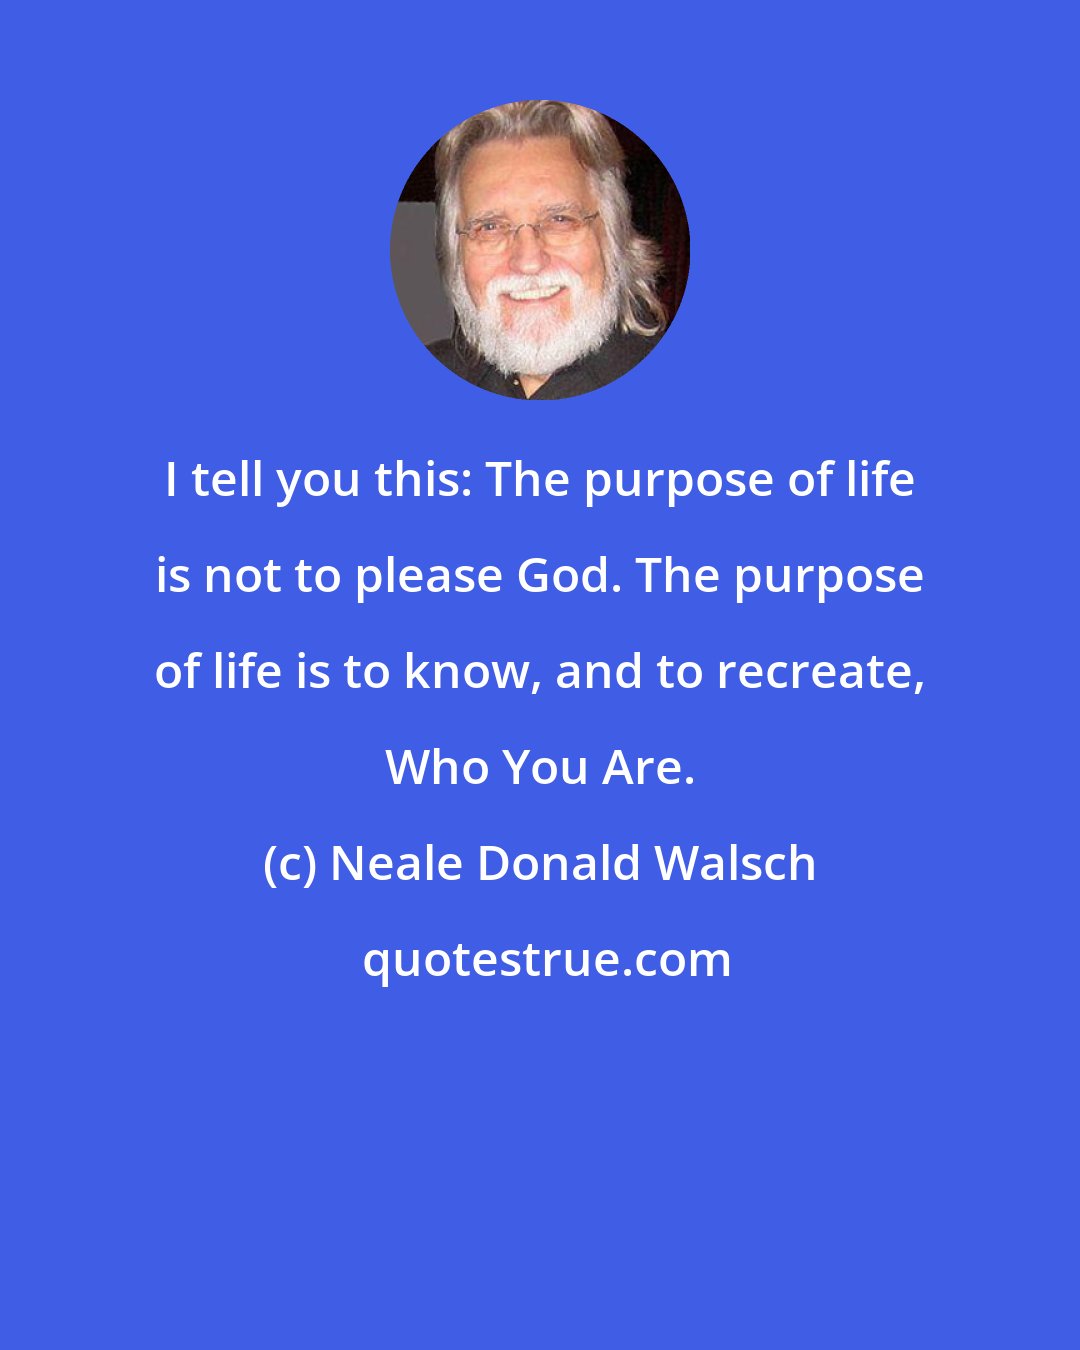 Neale Donald Walsch: I tell you this: The purpose of life is not to please God. The purpose of life is to know, and to recreate, Who You Are.